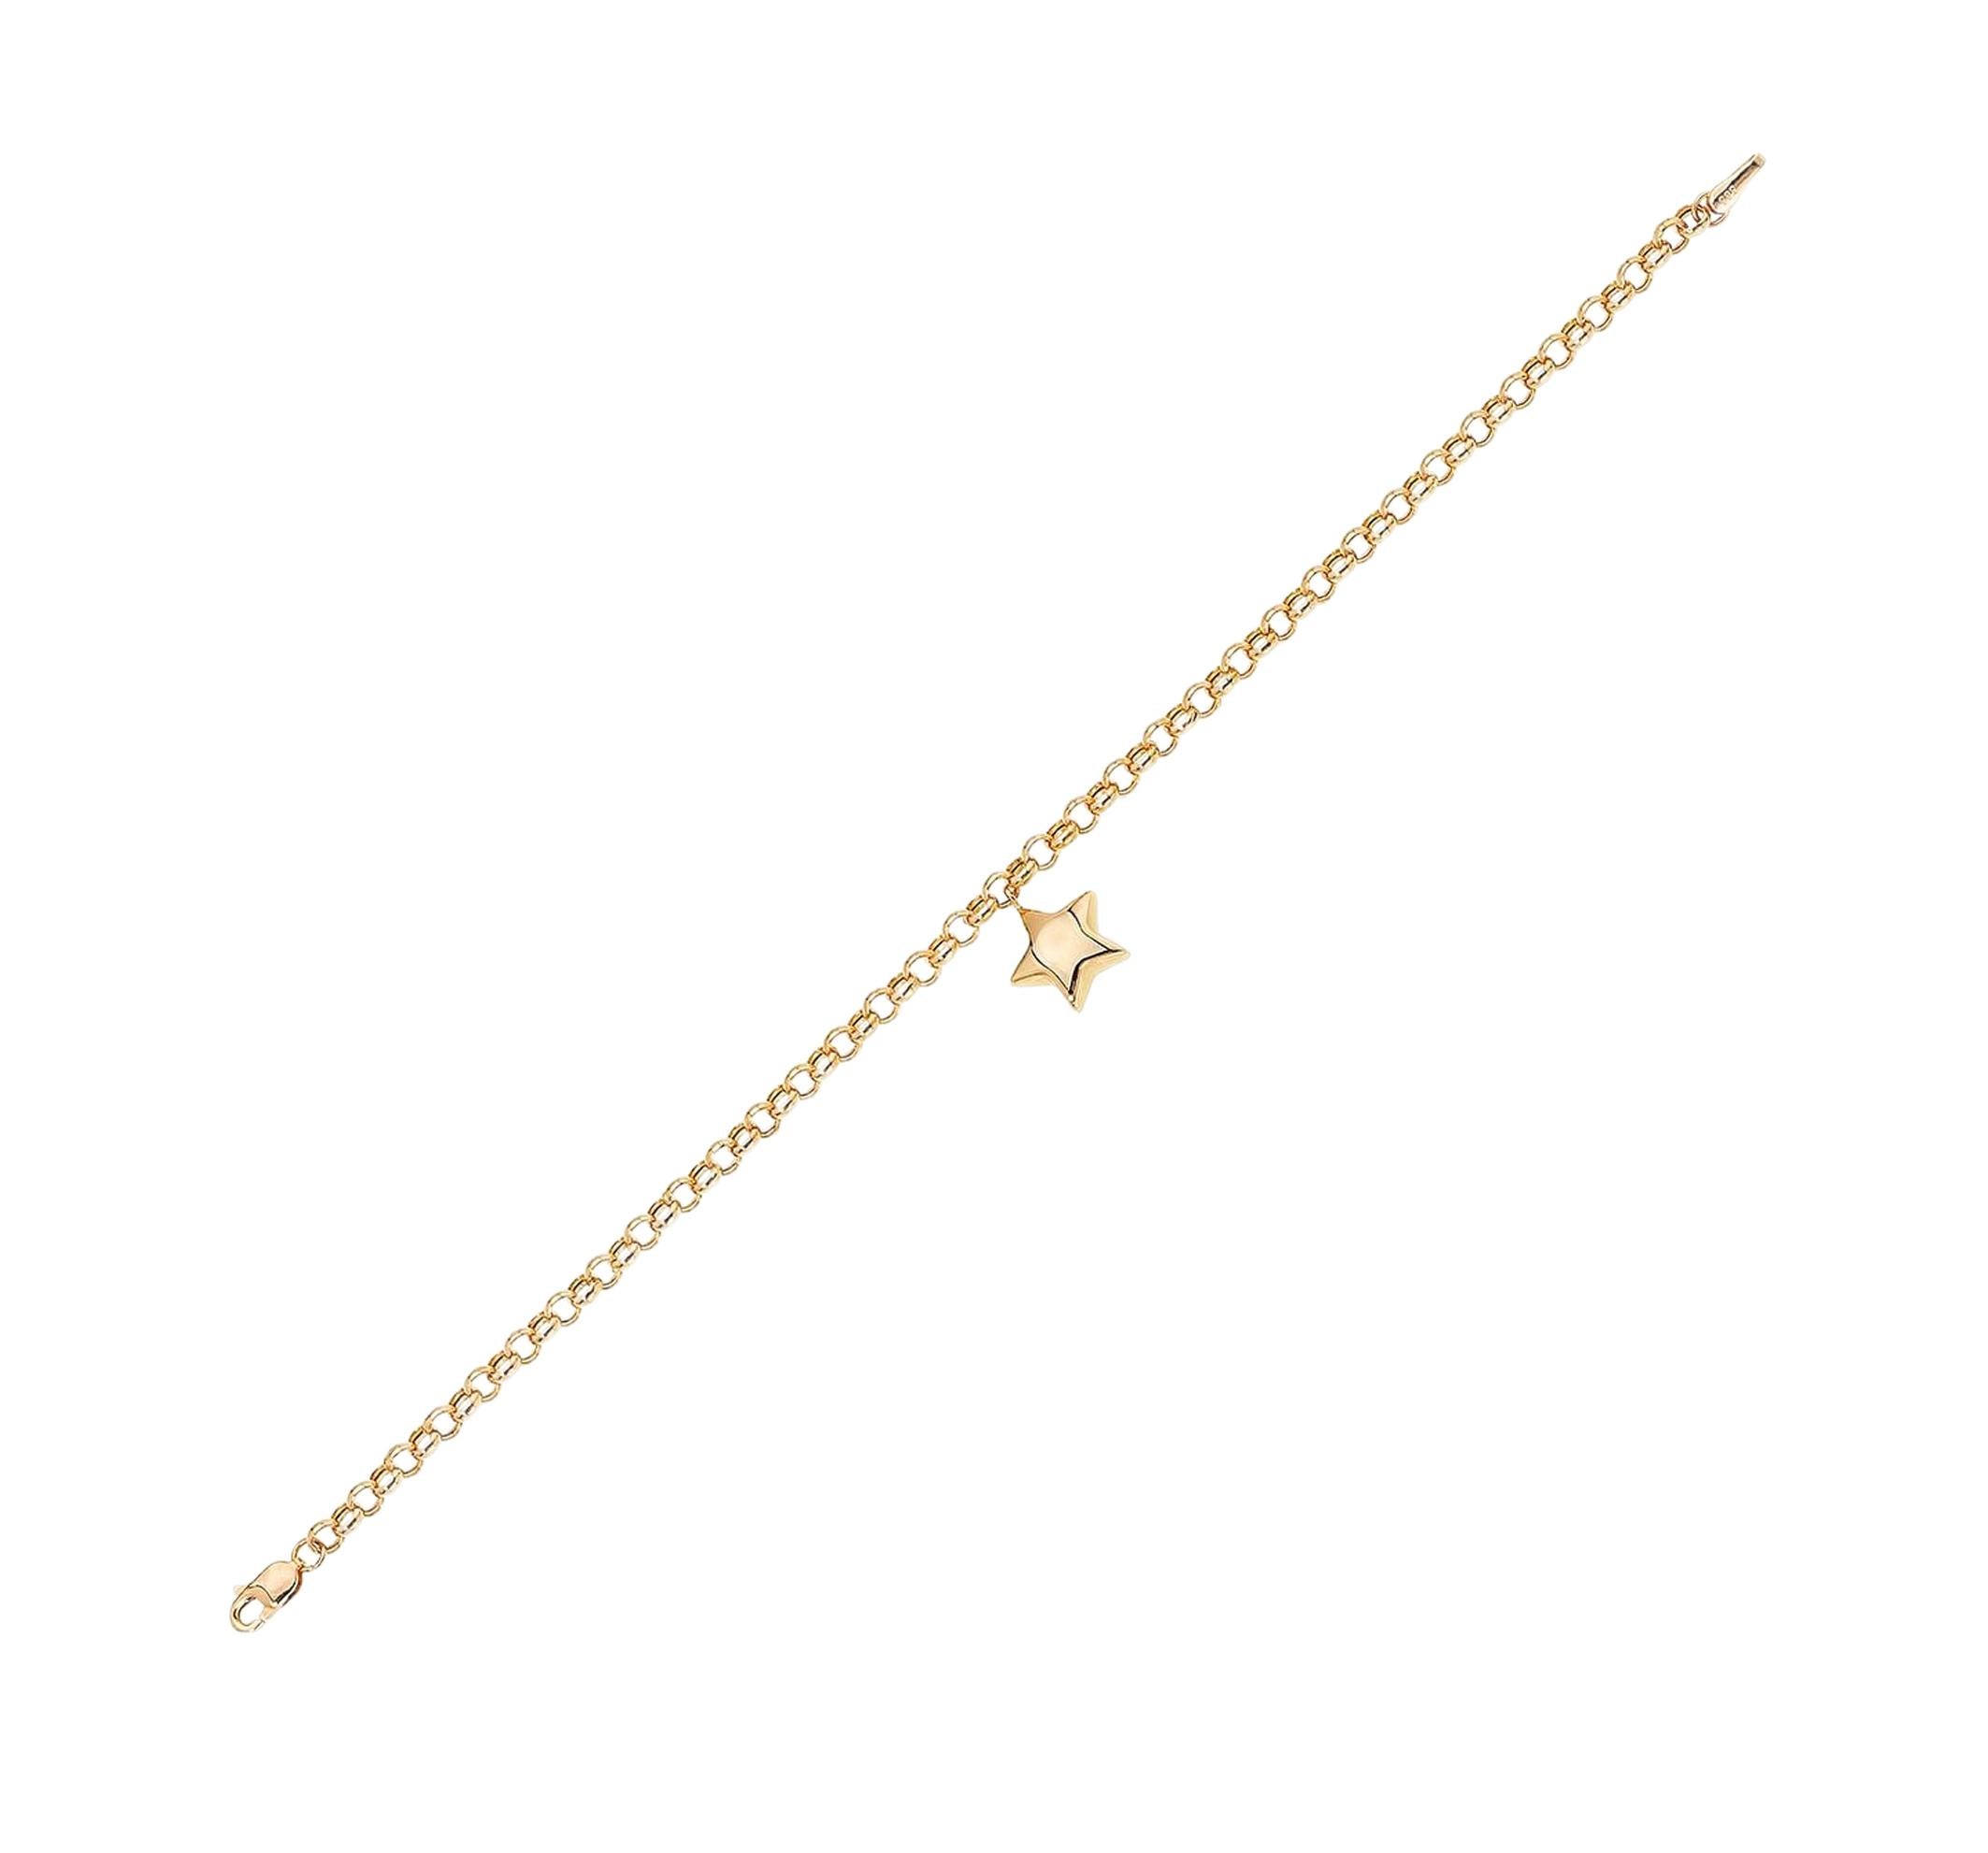  14 karat gold Star Charm Bracelet. Chain Bracelet with Star shaped pendant. Dainty Star Bracelet. Valentine's Day Gift jewelry. Star bracelets for women.

Total weight: 2.75 g.
14 karat  yellow gold 
Length:  18 sm
Star Wide: 12 mm covered with